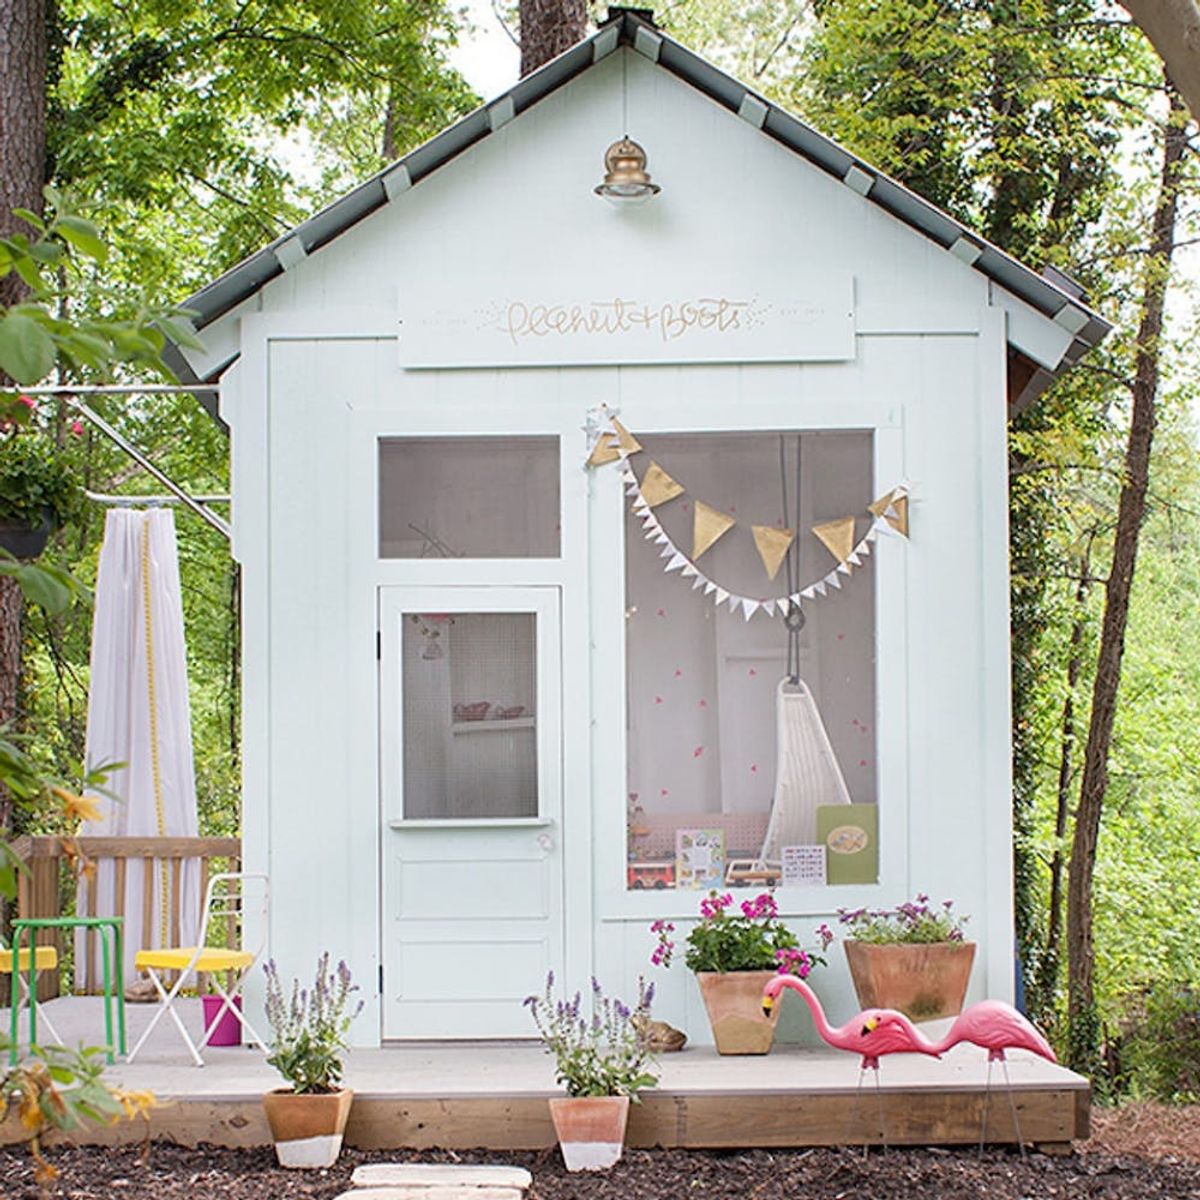 10 Dreamy Kids’ Playhouses You’ll Wish You Grew Up With